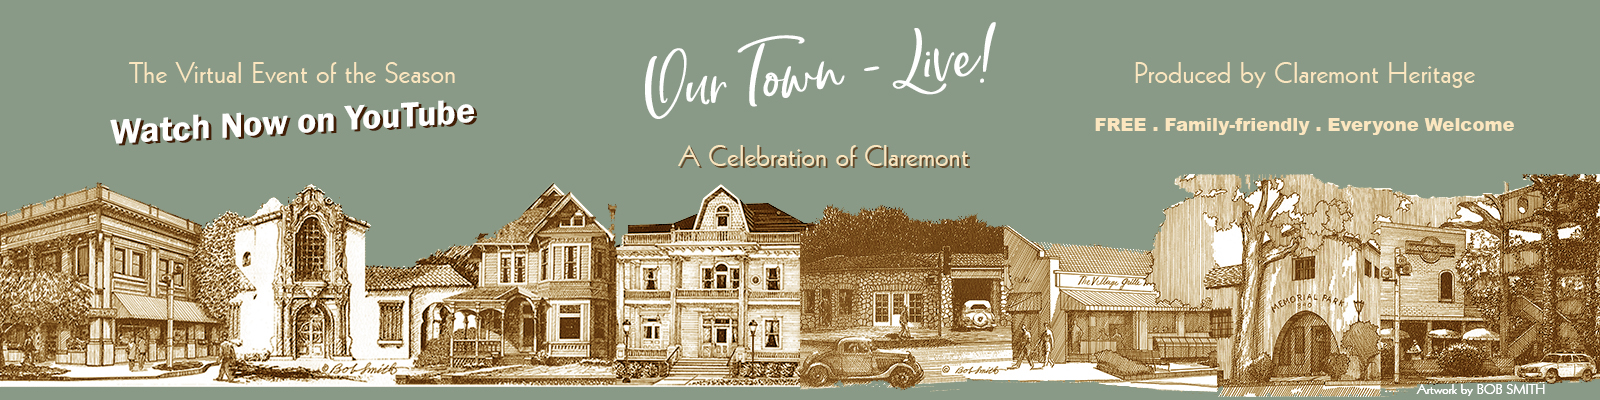 Our Town Live Claremont Heritage Sat May 23 2020 at 7:00pm